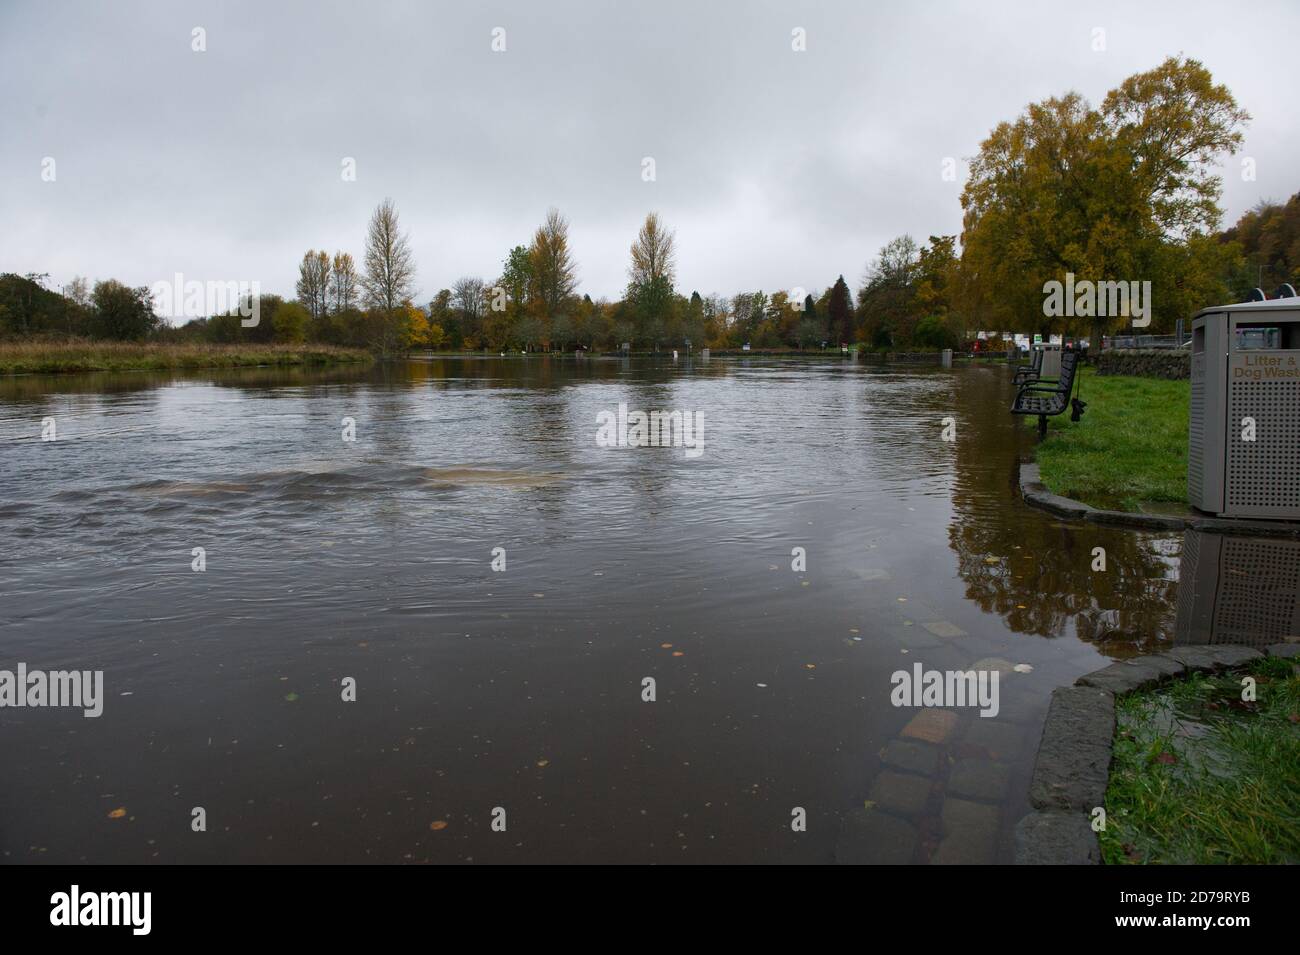 Callander, Scotland, UK. 21 October 2020. Pictured: A fast flowing and flooded River Teith which flows through the picturesque town of Callander in central Scotland. Credit: Colin Fisher/Alamy Live News. Stock Photo